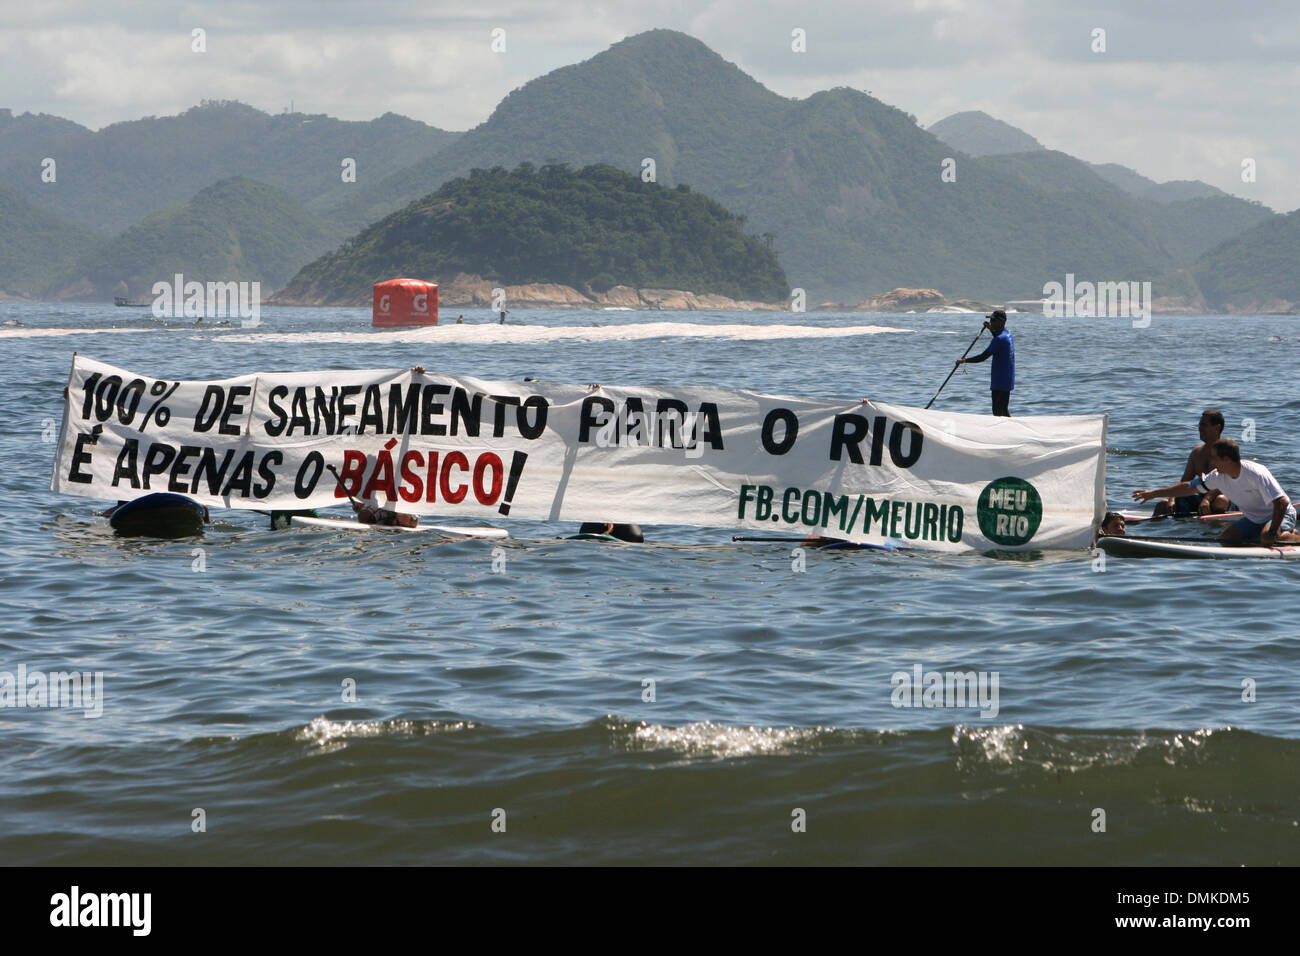 Copacabana Beach, Rio de Janeiro, Brazil, 14th Dec 2013. Activists of the "Verao do Saneamento" (Summer of Sanitation) campaign open a banner in the sea during the "King and Queen of the Sea" open water swimming tournament. They ask for a governmental sanitation plan that encompasses all the city. Credit:  Maria Adelaide Silva/Alamy Live News Stock Photo